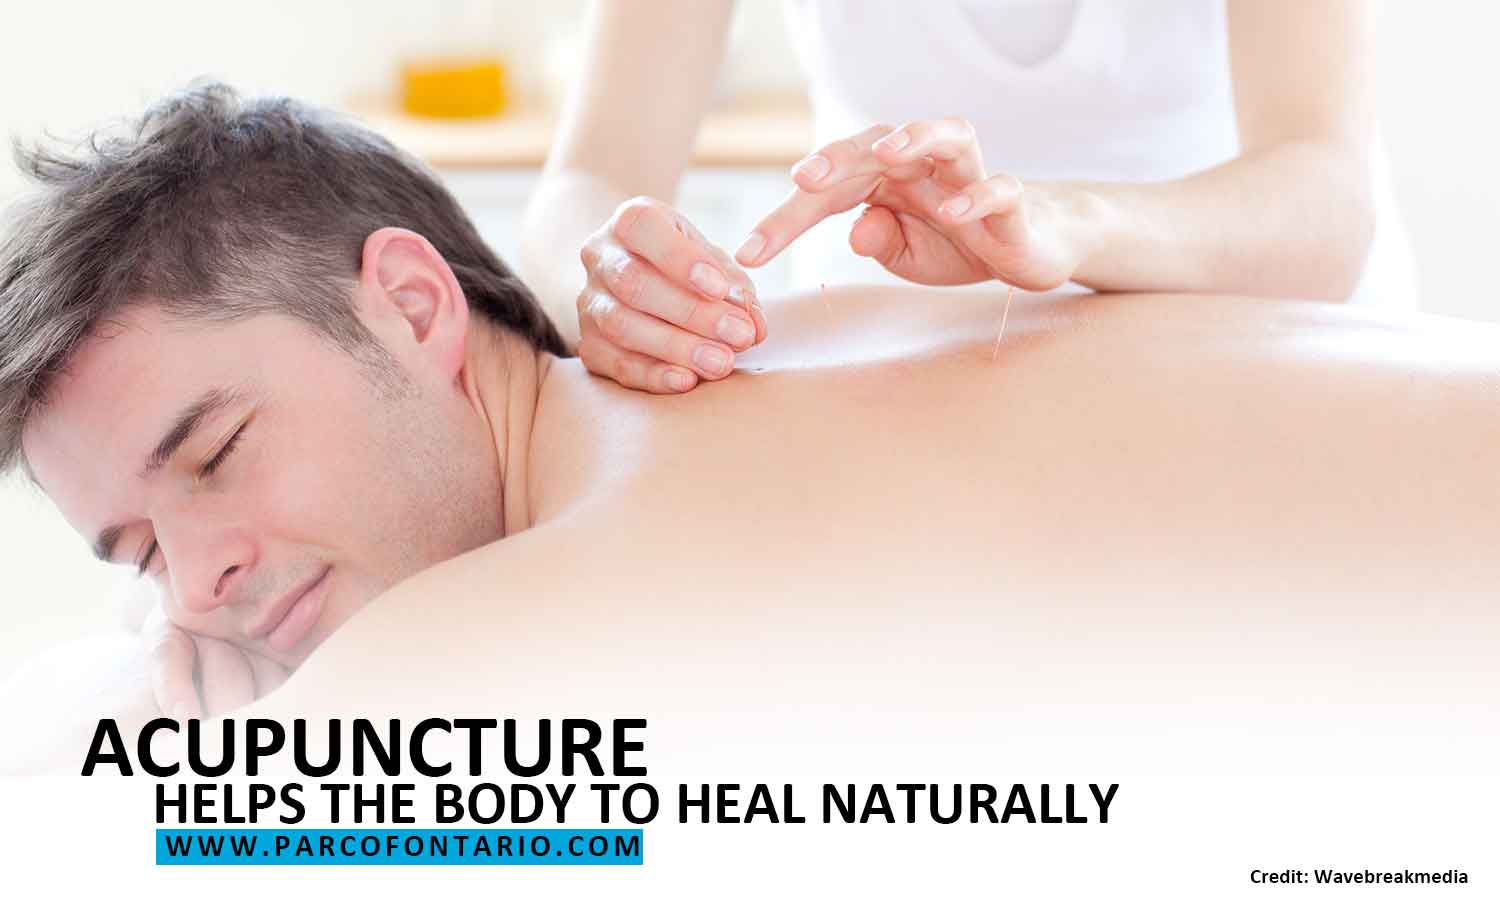 https://www.parcofontario.com/wp-content/uploads/2019/11/Acupuncture-helps-the-body-to-heal-naturally.jpg